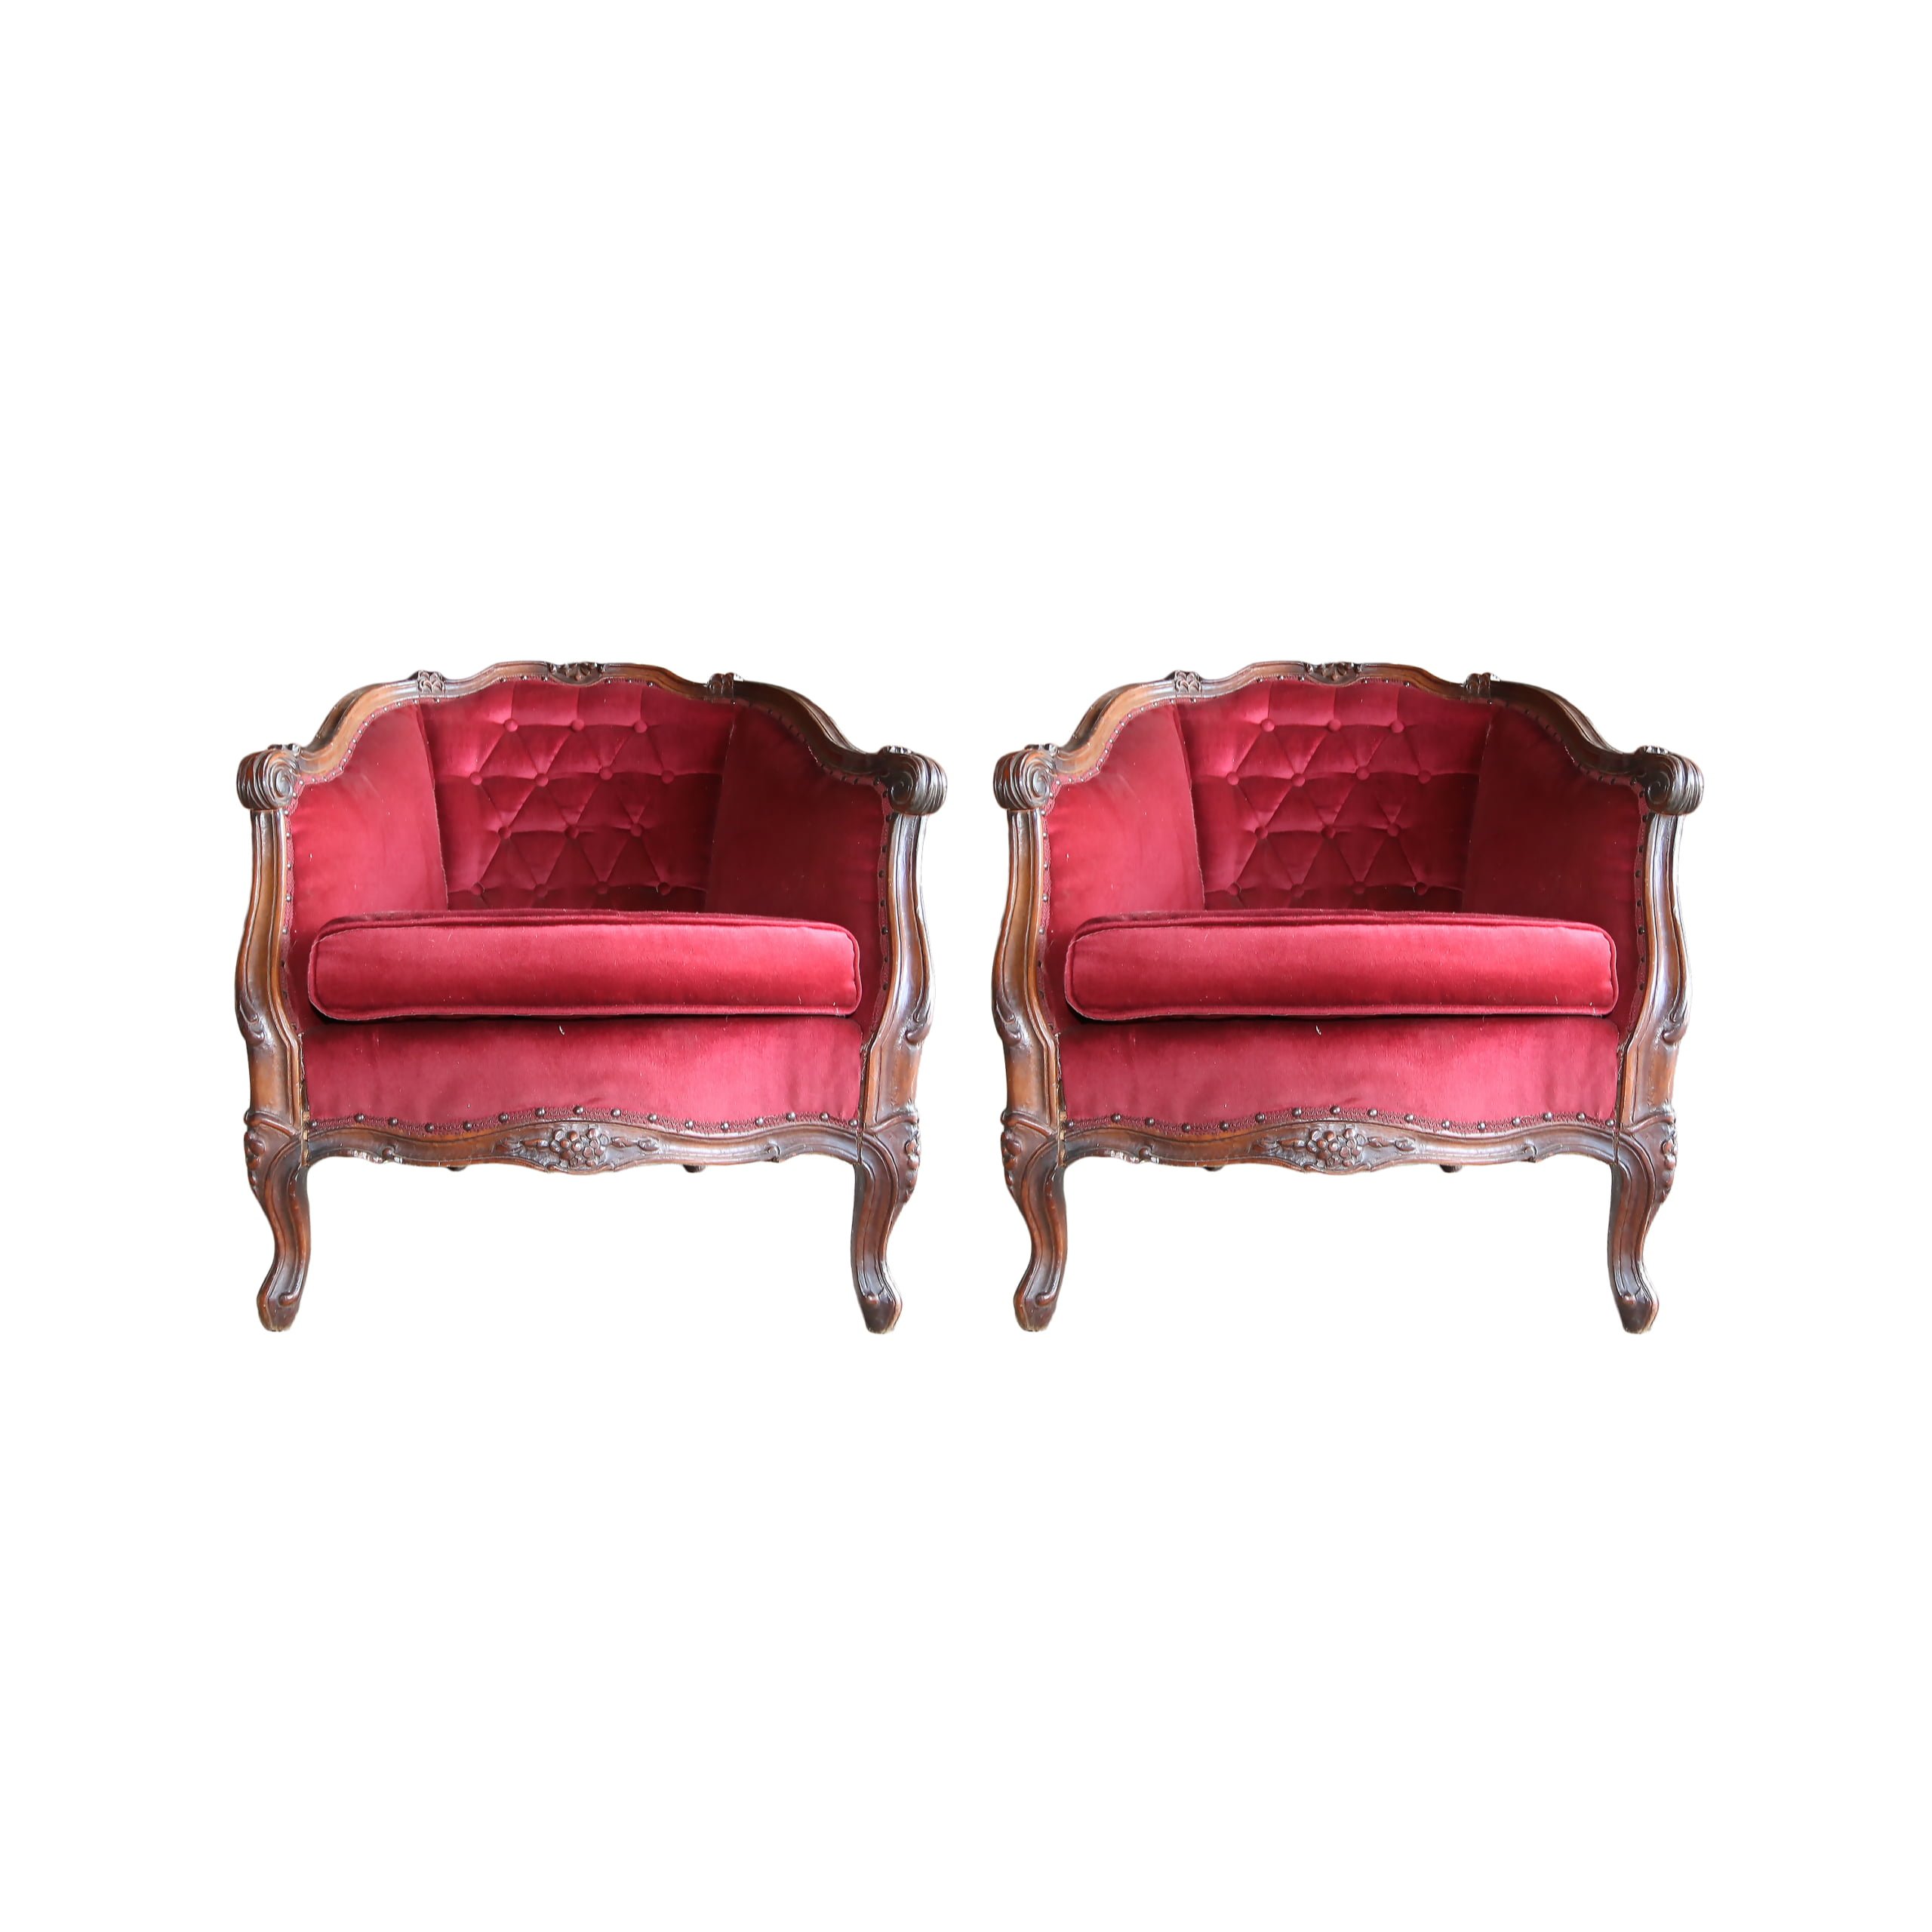 French button back arm chairs